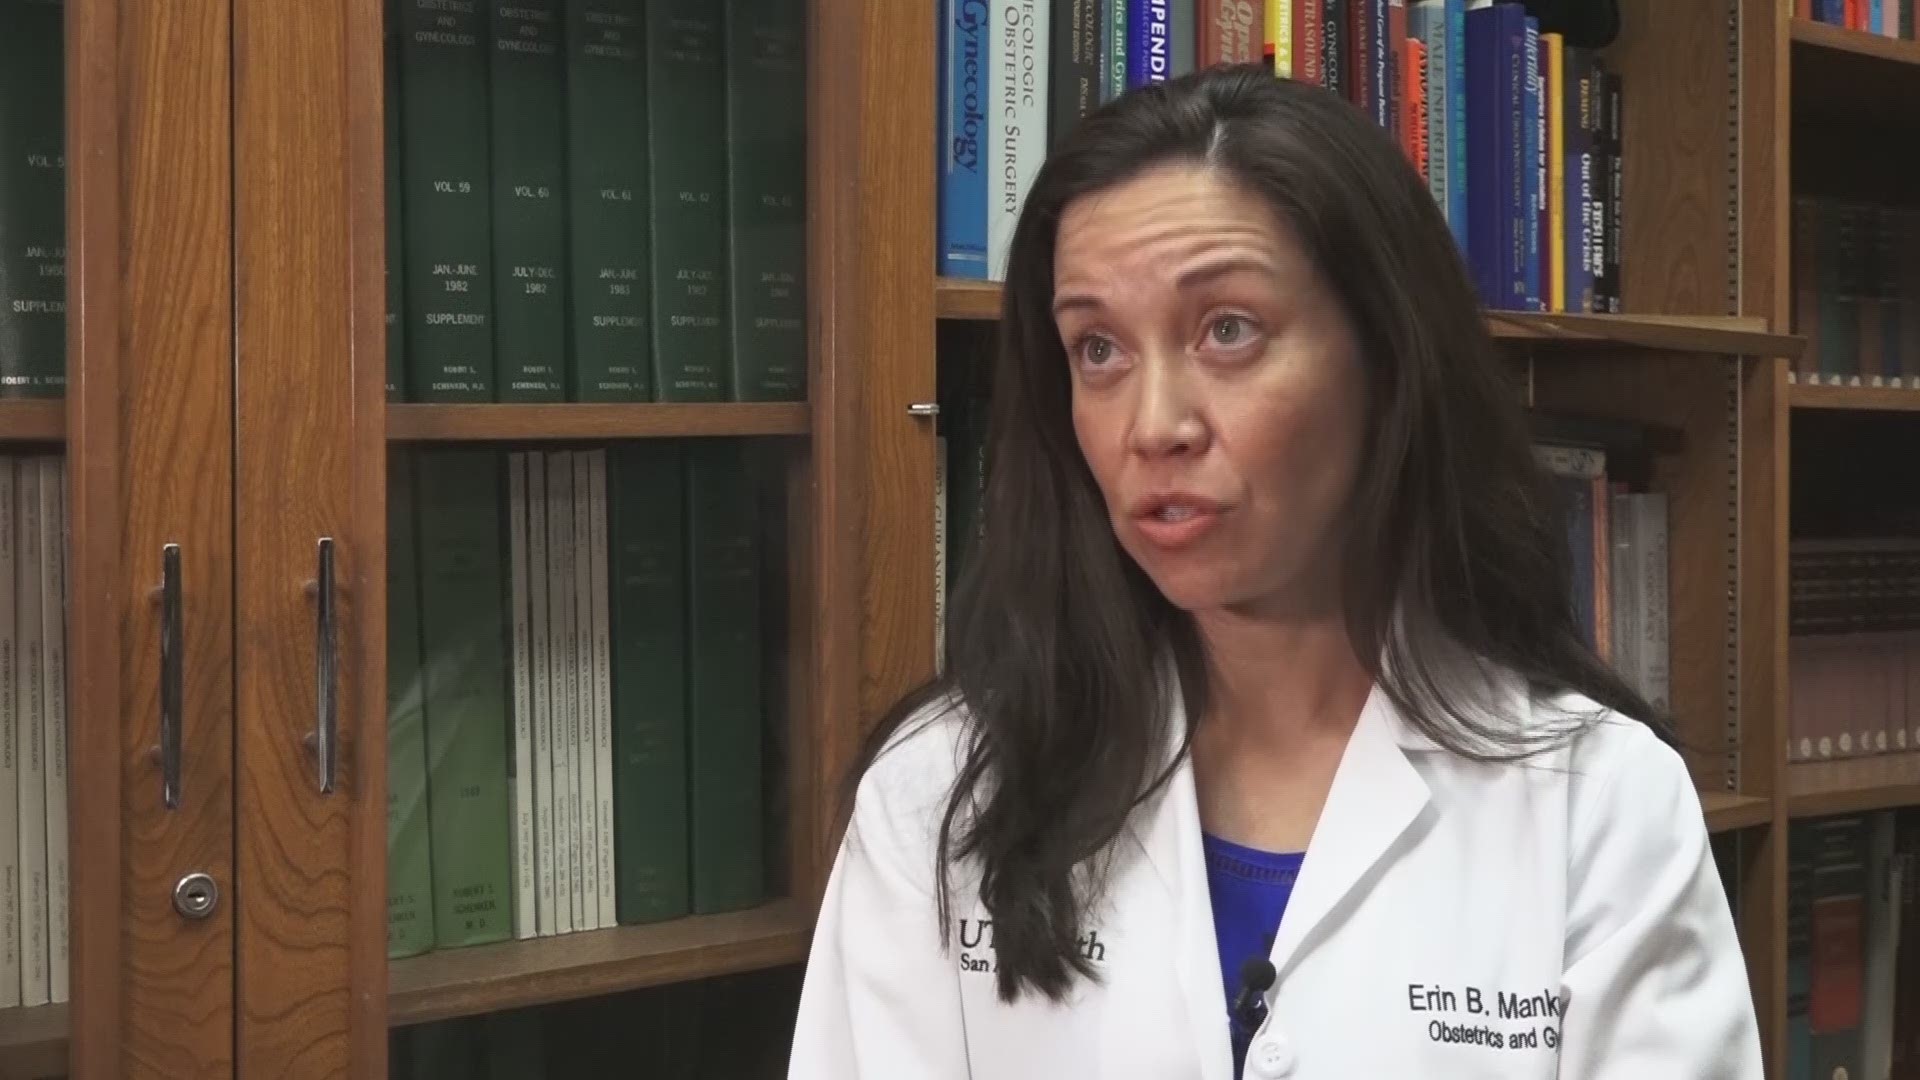 Dr. Erin Mankus speaks about the importance of the HPV vaccine in preventing cervical cancer, as well as other cancers in both men and women.